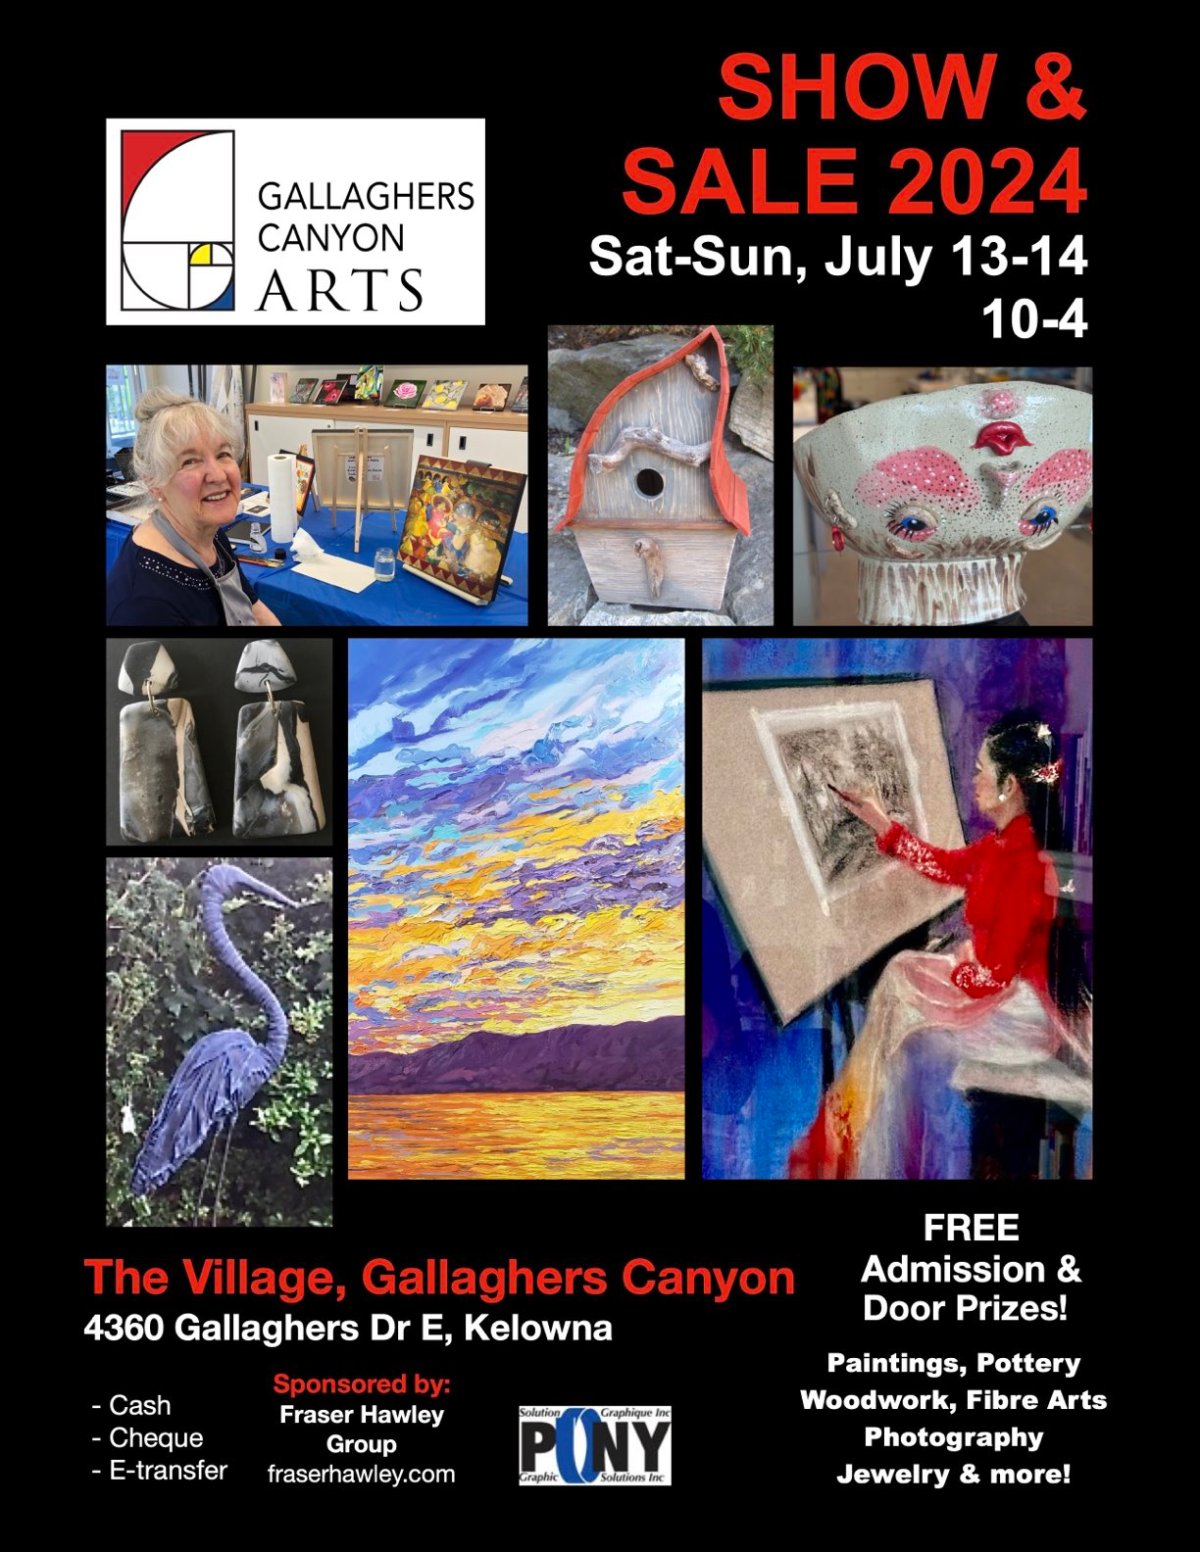 Gallaghers Canyon 21st annual art show and sale - image